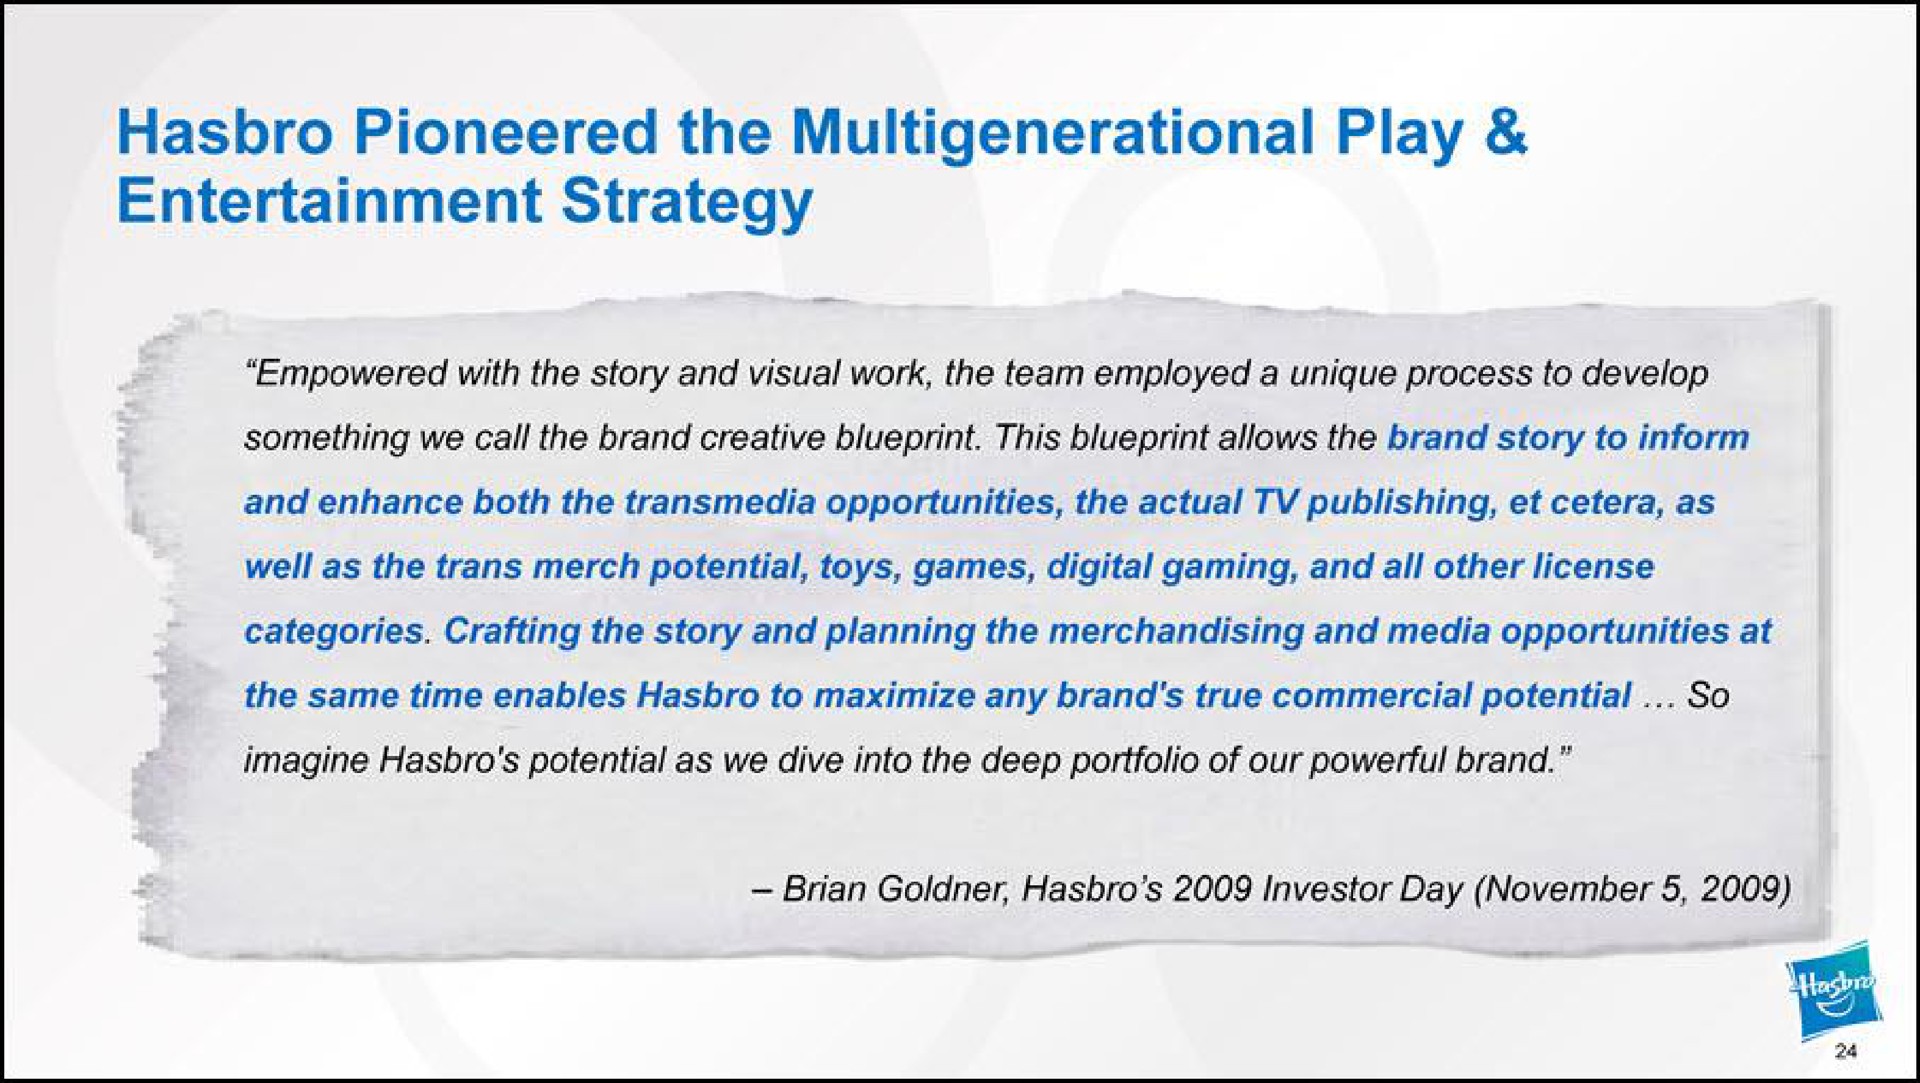 pioneered the play entertainment strategy empowered with the story and visual work team employed a unique process develop something we call the brand creative blueprint this blueprint allows the brand story to inform and enhance both the opportunities the actual publishing as imagine potential as we dive into the deep portfolio of our powerful brand well as the merch potential toys games digital gaming and all other license the same time enables to maximize any brand true commercial potential so categories crafting the story and planning the merchandising and media opportunities at investor day | Hasbro